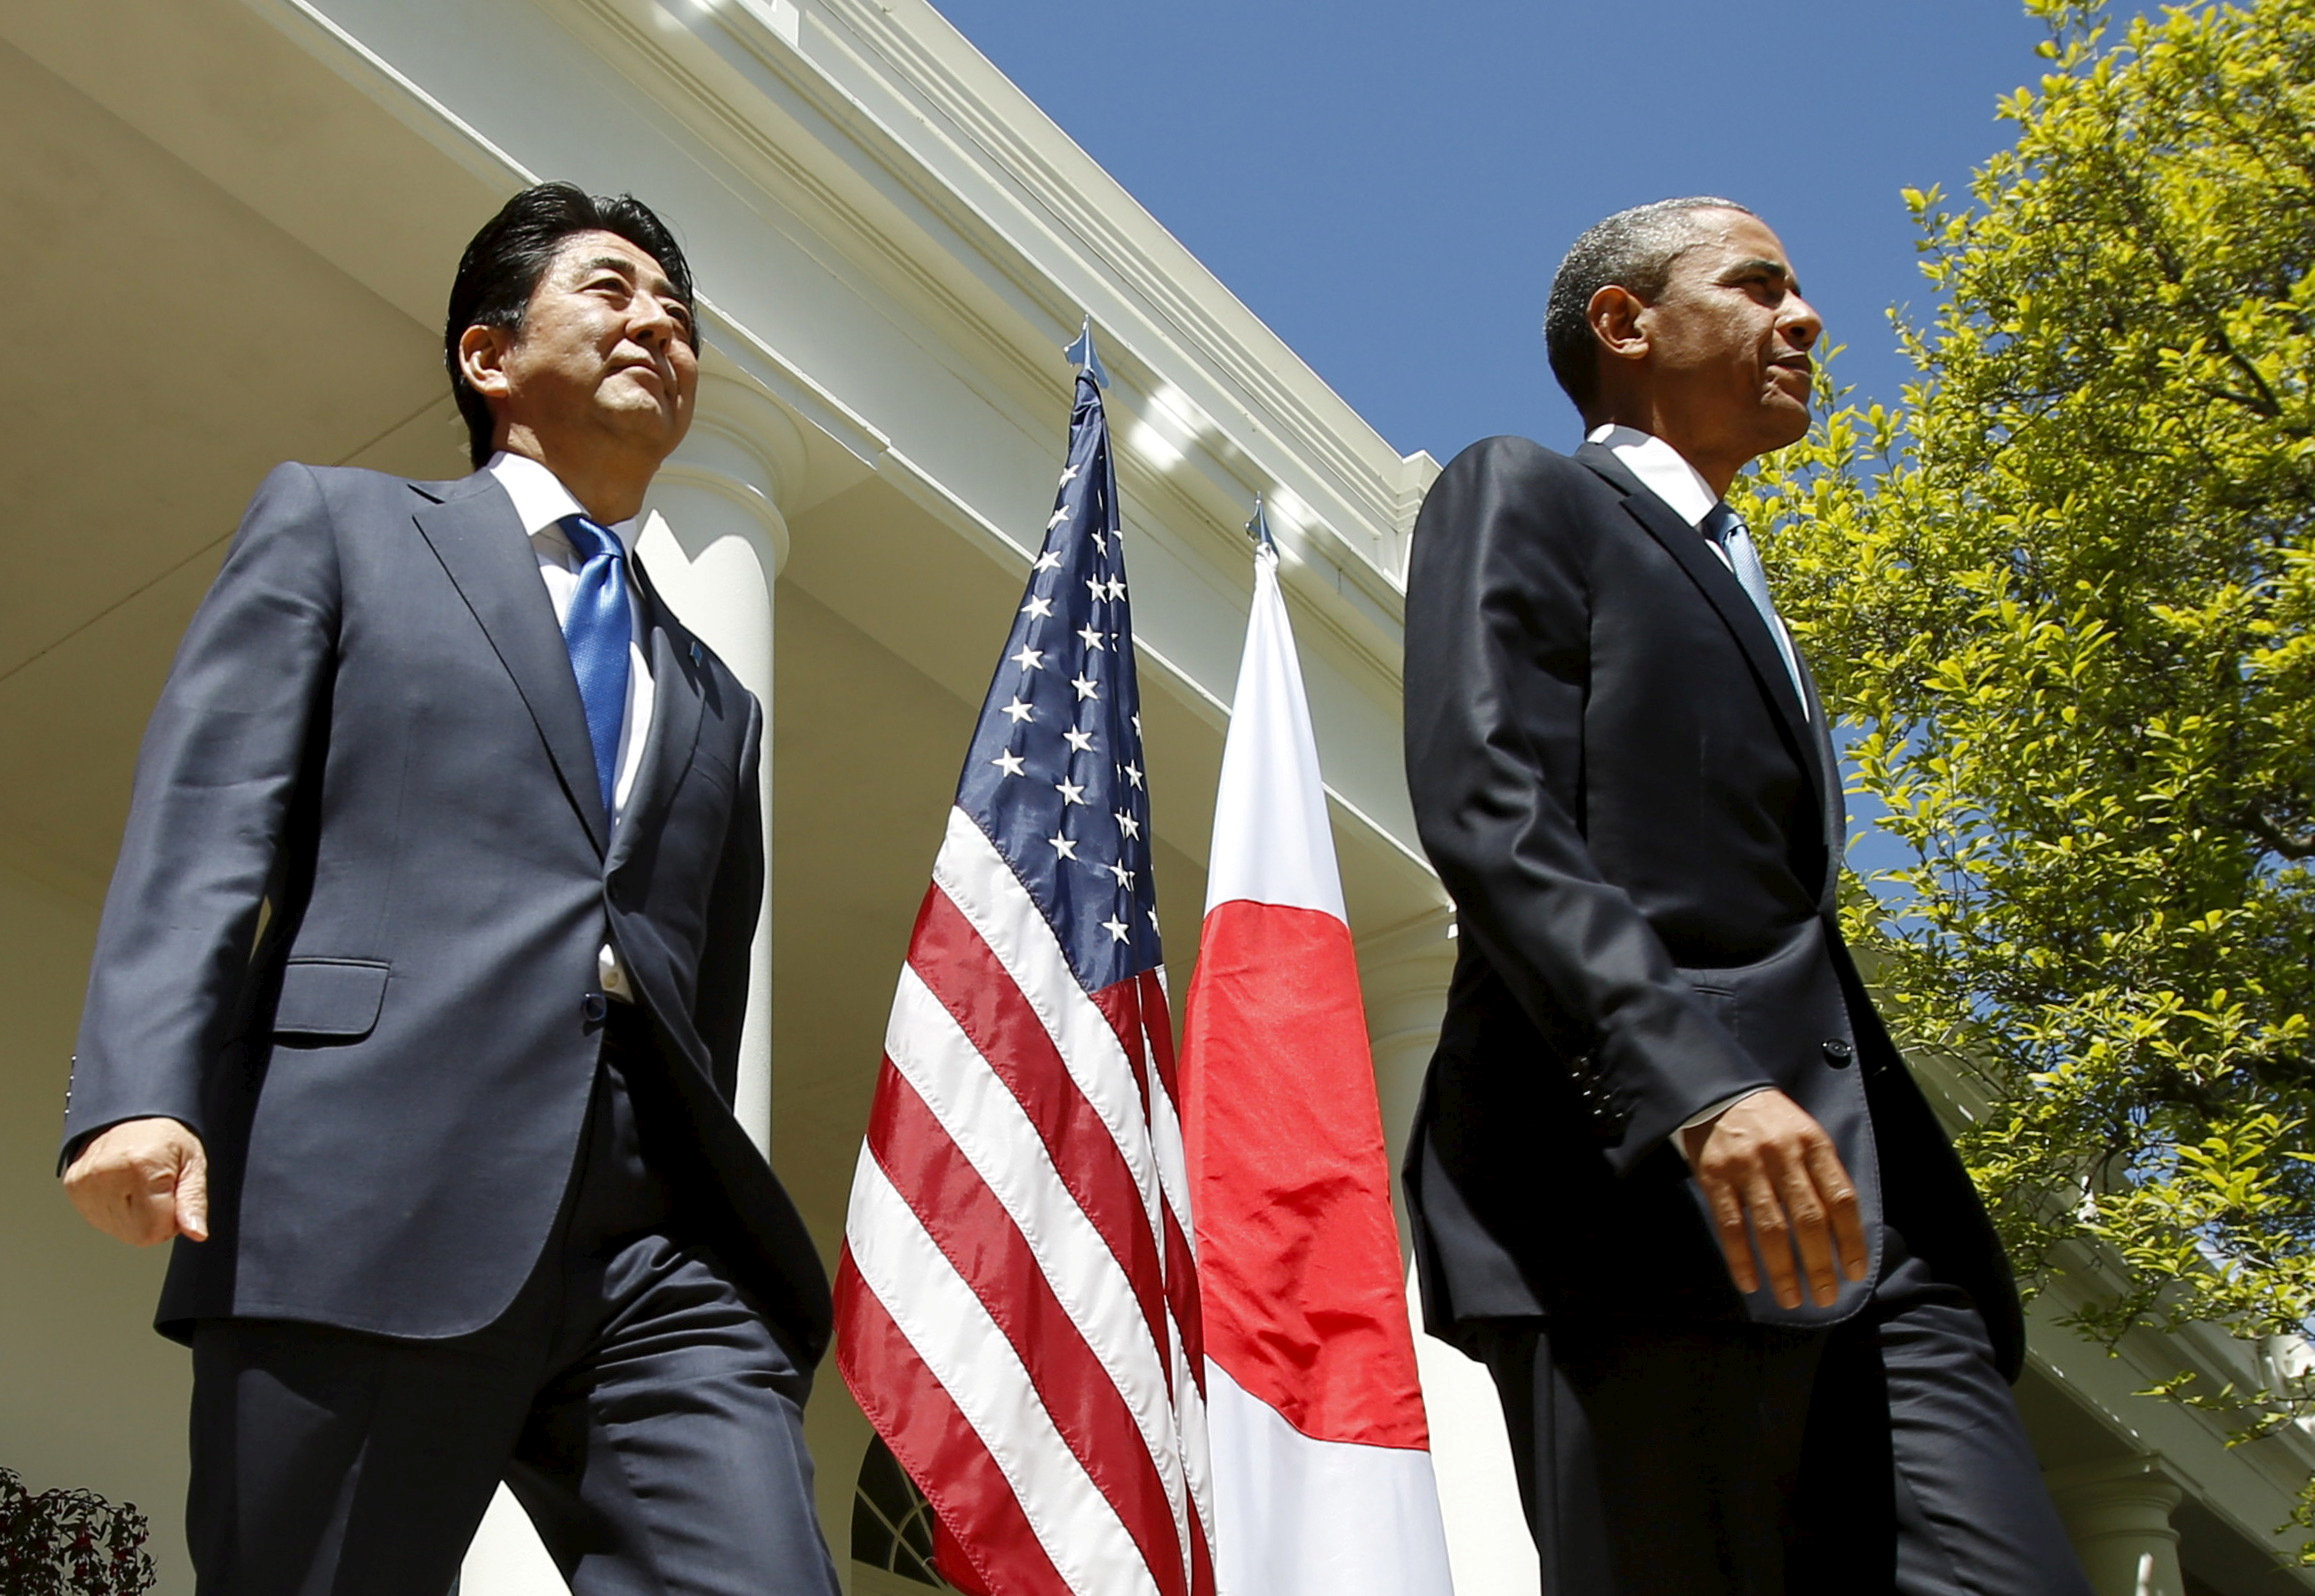 U.S. President Barack Obama, seen here with Prime Minister Shinzo Abe at joint news conference at the White House in Washington in April last year, will become the first active U.S. president to visit Hiroshima. Obama will make the historic visit accompanied by Abe 'to highlight his continued commitment to pursuing the peace and security of a world without nuclear weapons,' White House spokesman Josh Earnest said Monday. | REUTERS